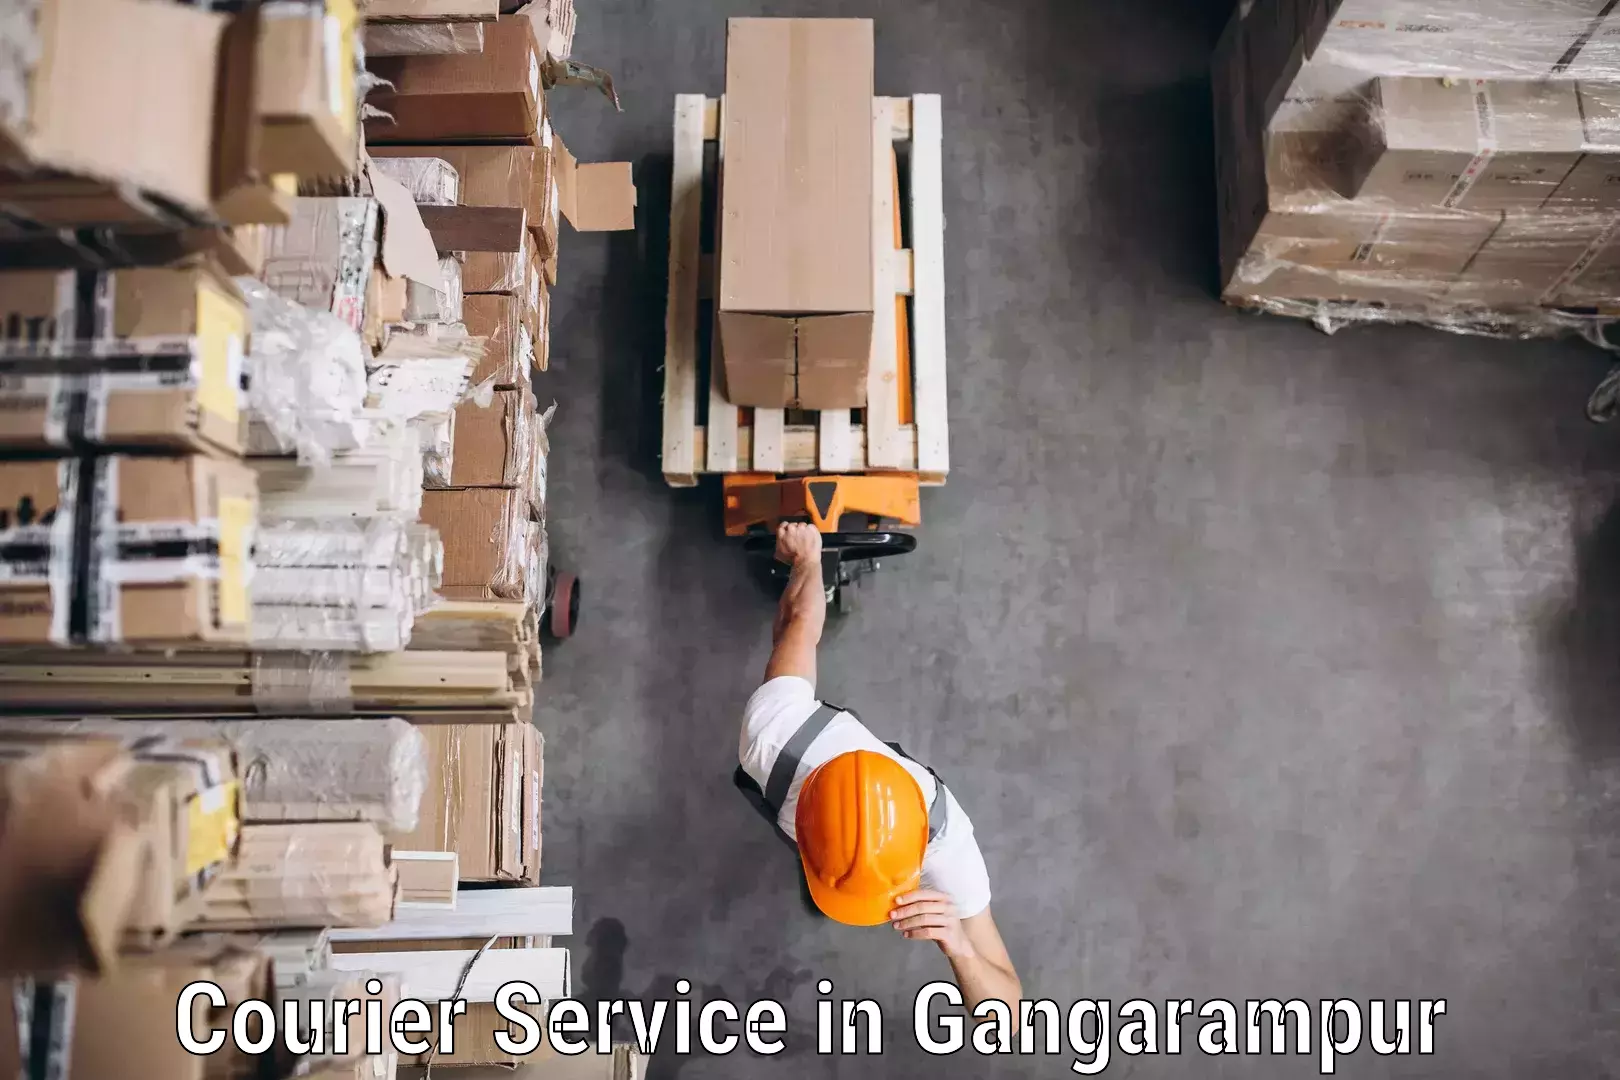 Secure package delivery in Gangarampur